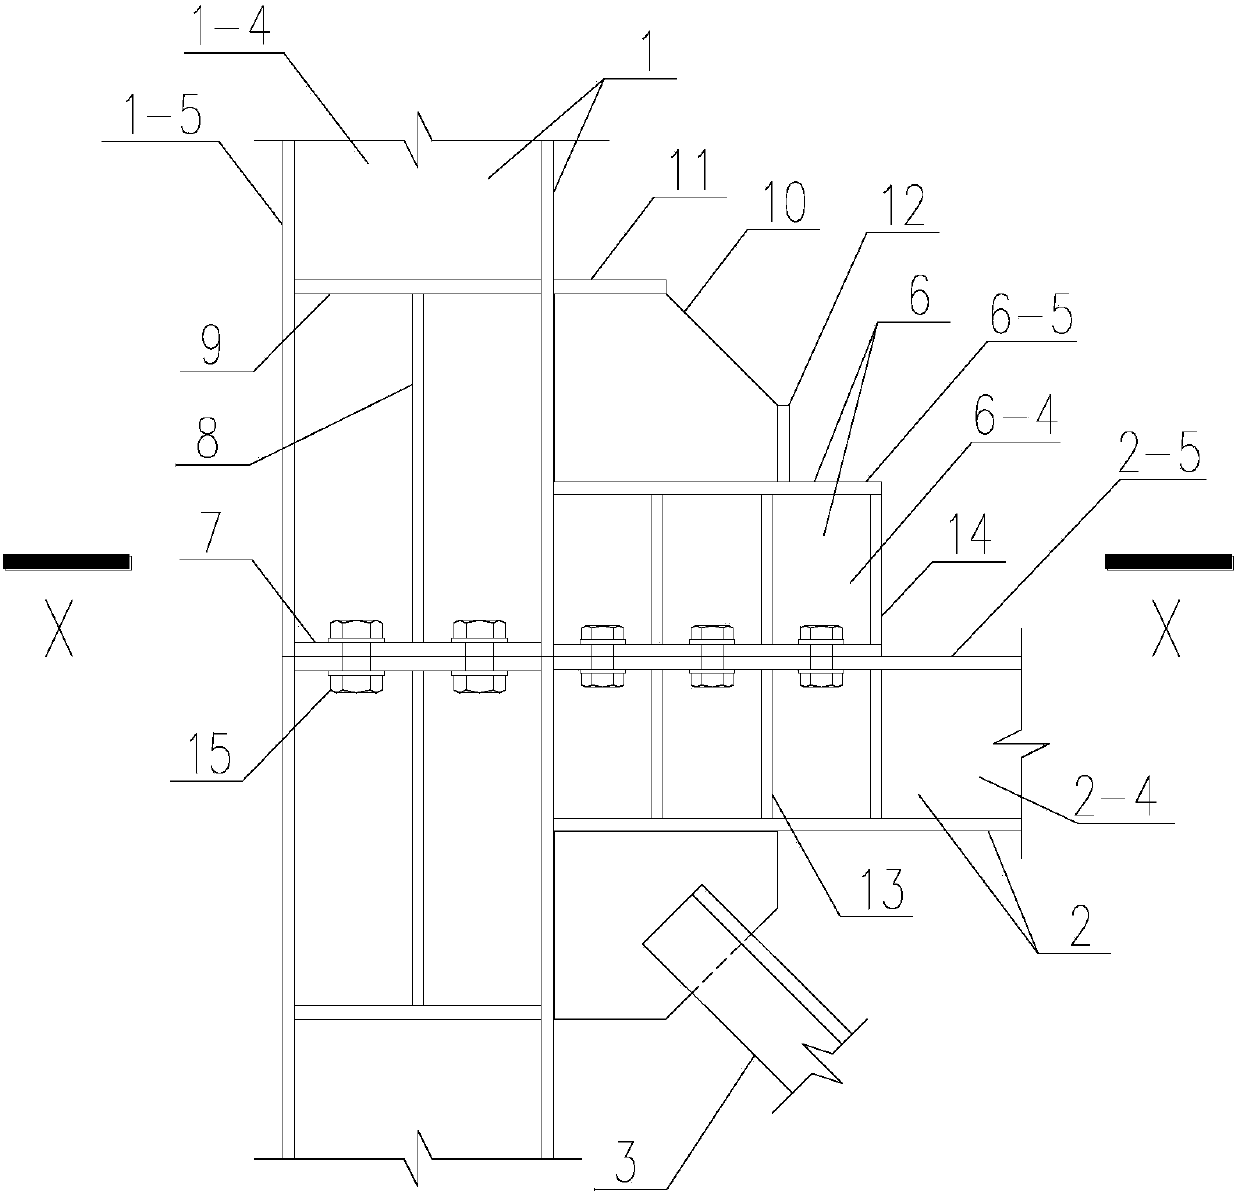 Prefabricated supporting steel frame column end splicing node structure